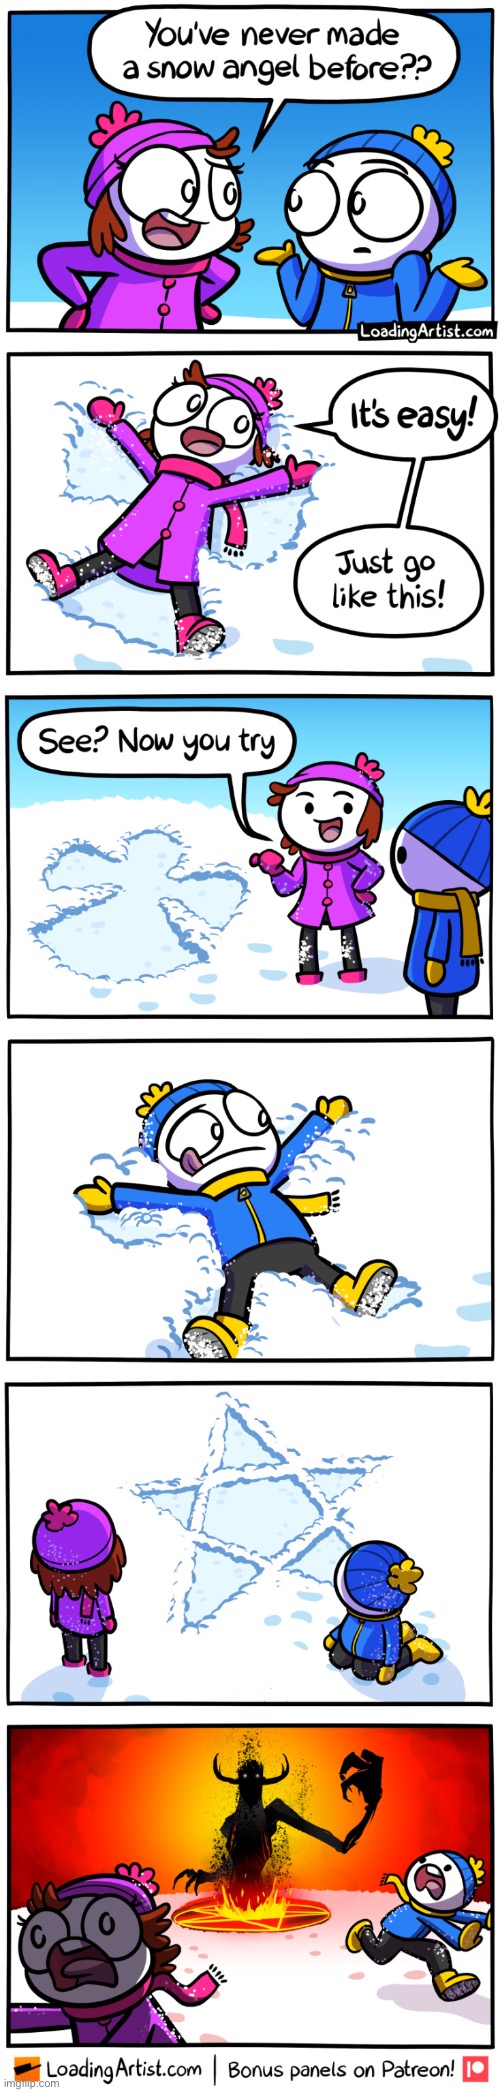 Happy holidays everyone! Credits to the LoadingArtist for this one. | image tagged in snow angel,funny,comics,the loading artist,winter | made w/ Imgflip meme maker